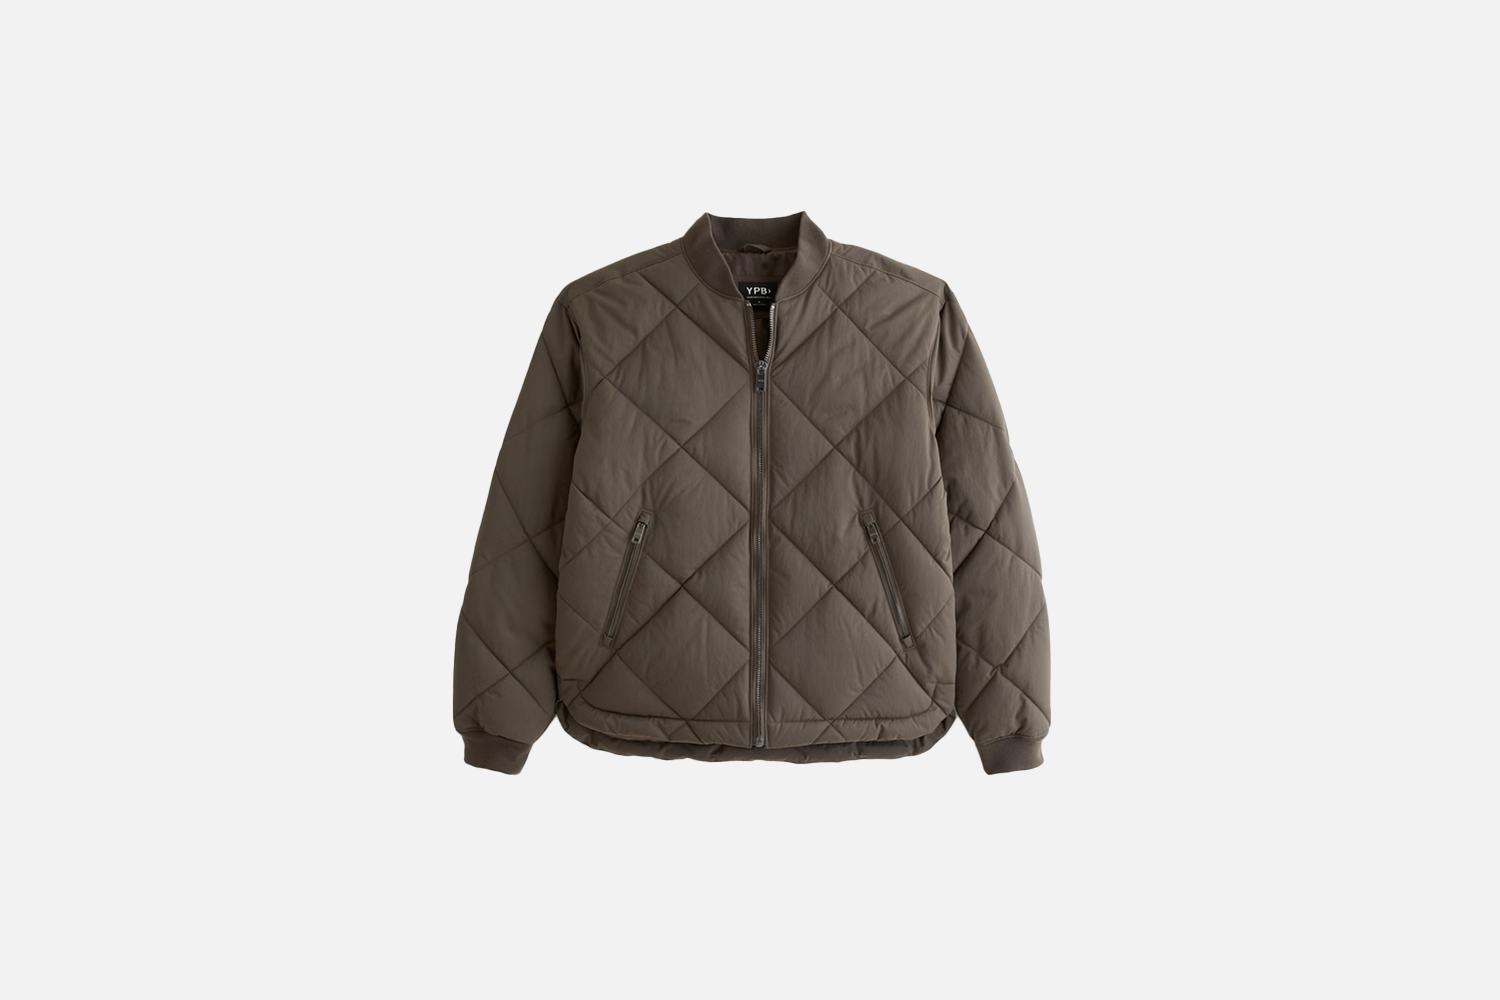 Abercrombie & Fitch YPB Quilted Bomber Jacket